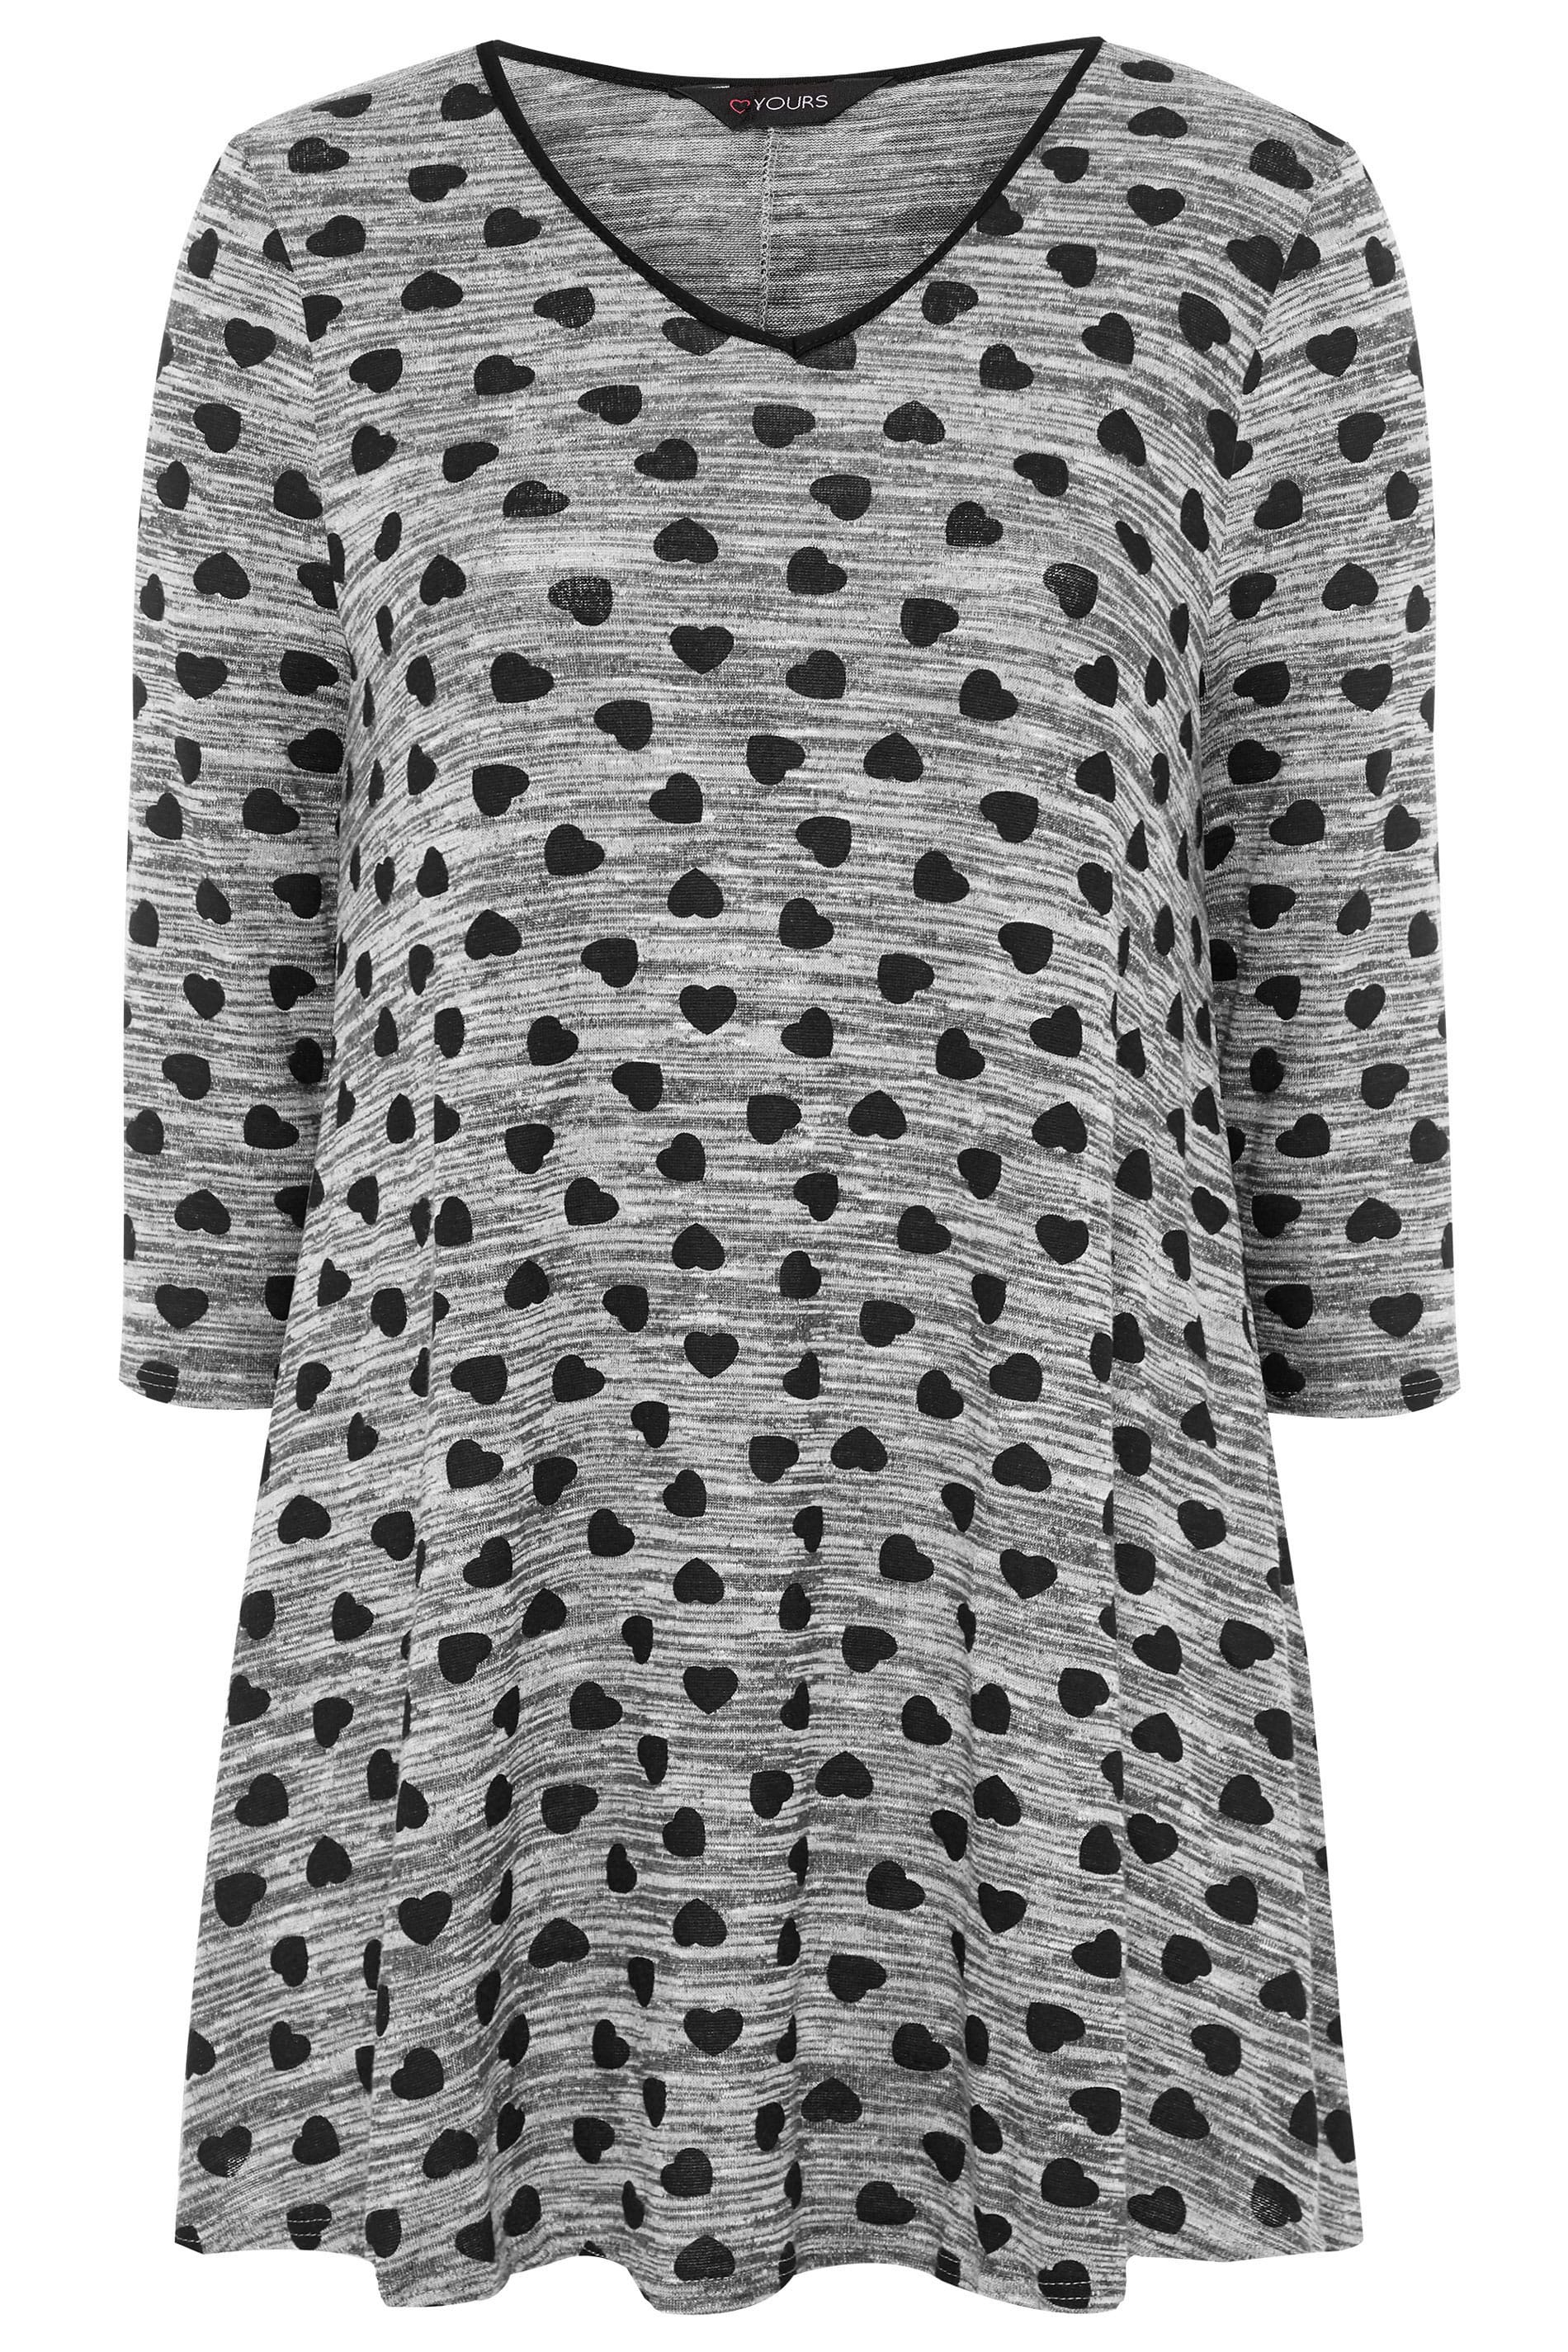 Grey Marl Heart Print Swing Top | Yours Clothing